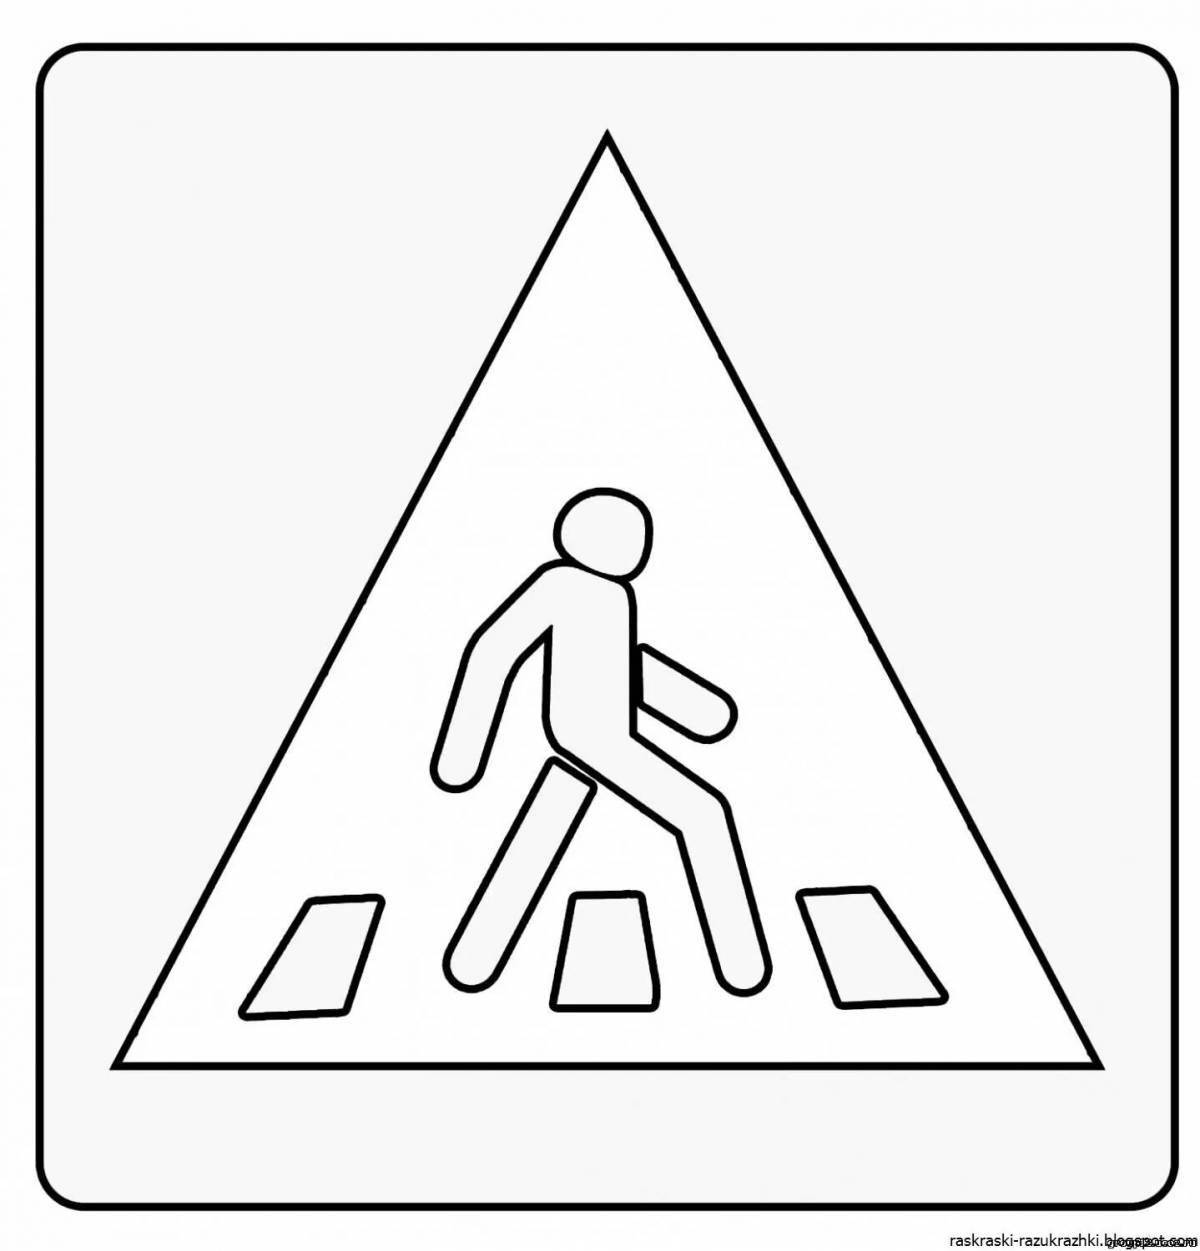 Coloring for bright traffic signs for kids